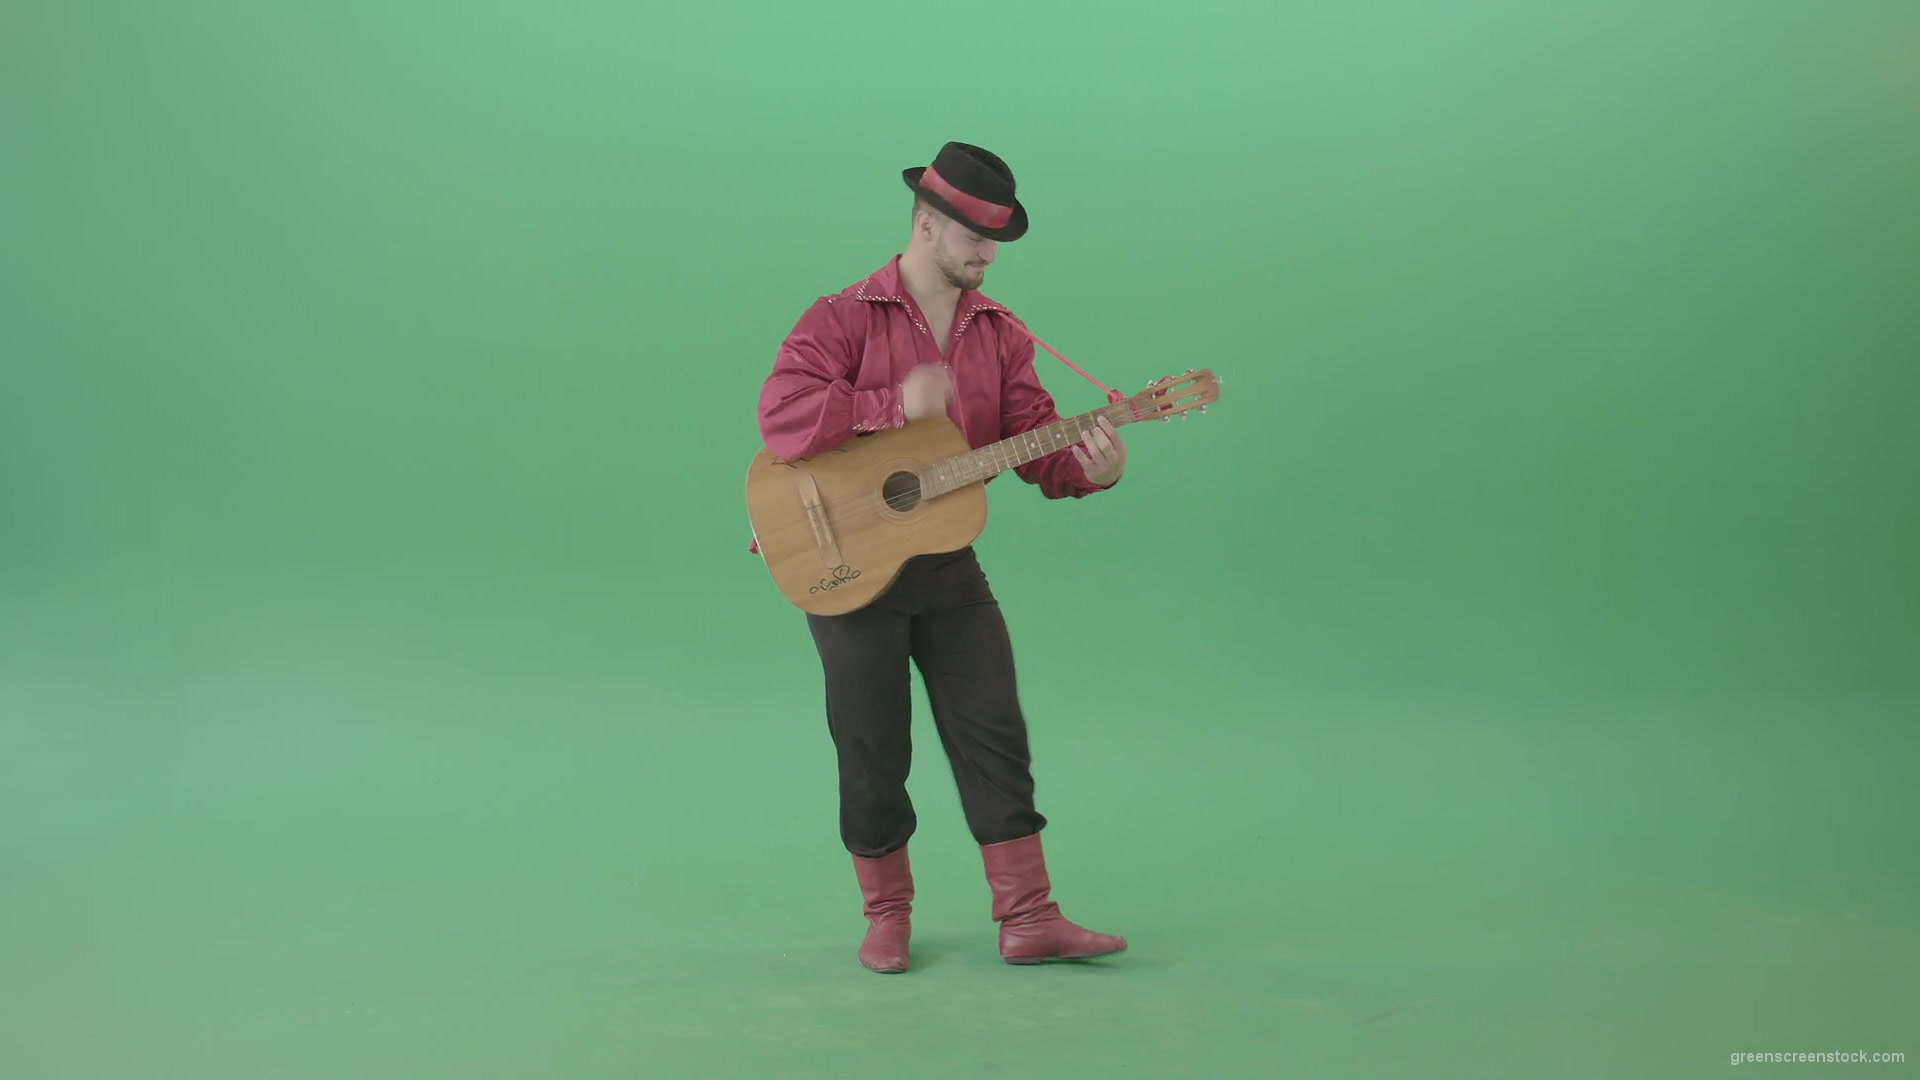 Balkan-Gipsy-man-in-red-shirt-playing-guitar-isolated-on-green-screen-4K-Video-Footage-1920_006 Green Screen Stock